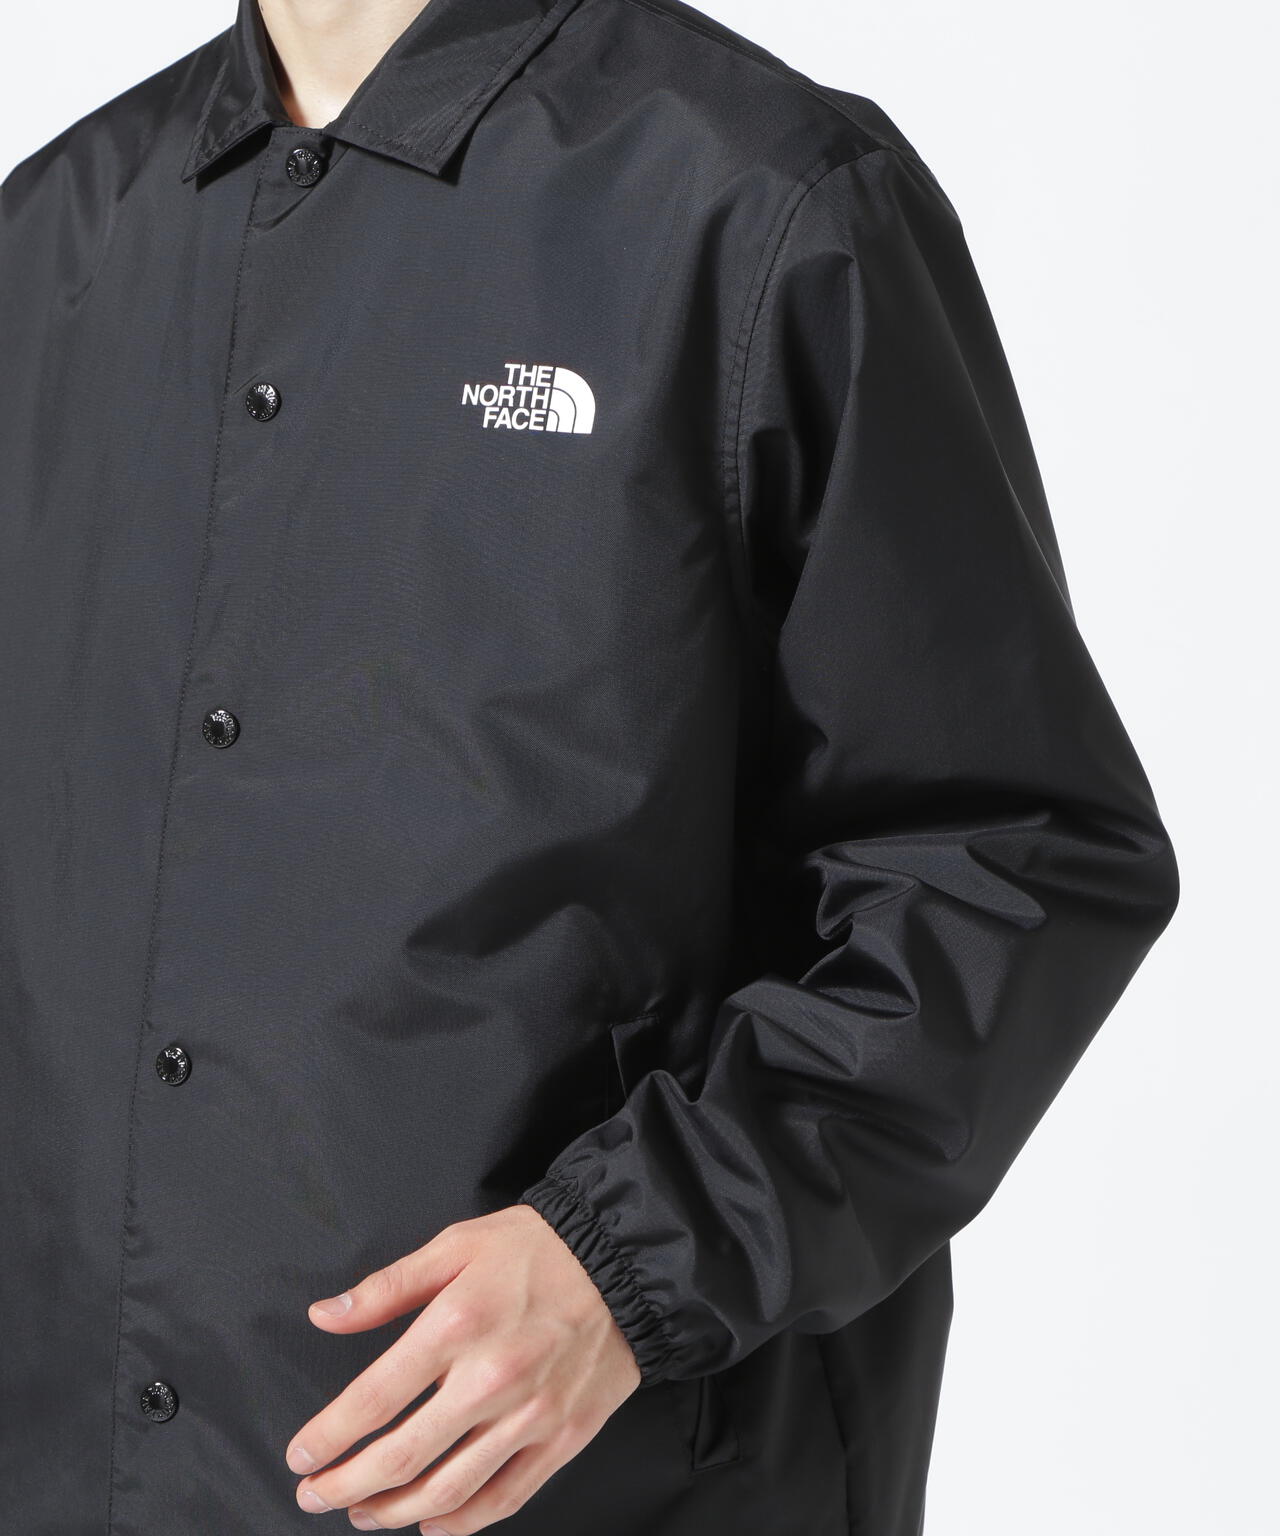 THE NORTH FACE / NEVER STOP ING The Coach Jacket | B'2nd ( ビー 